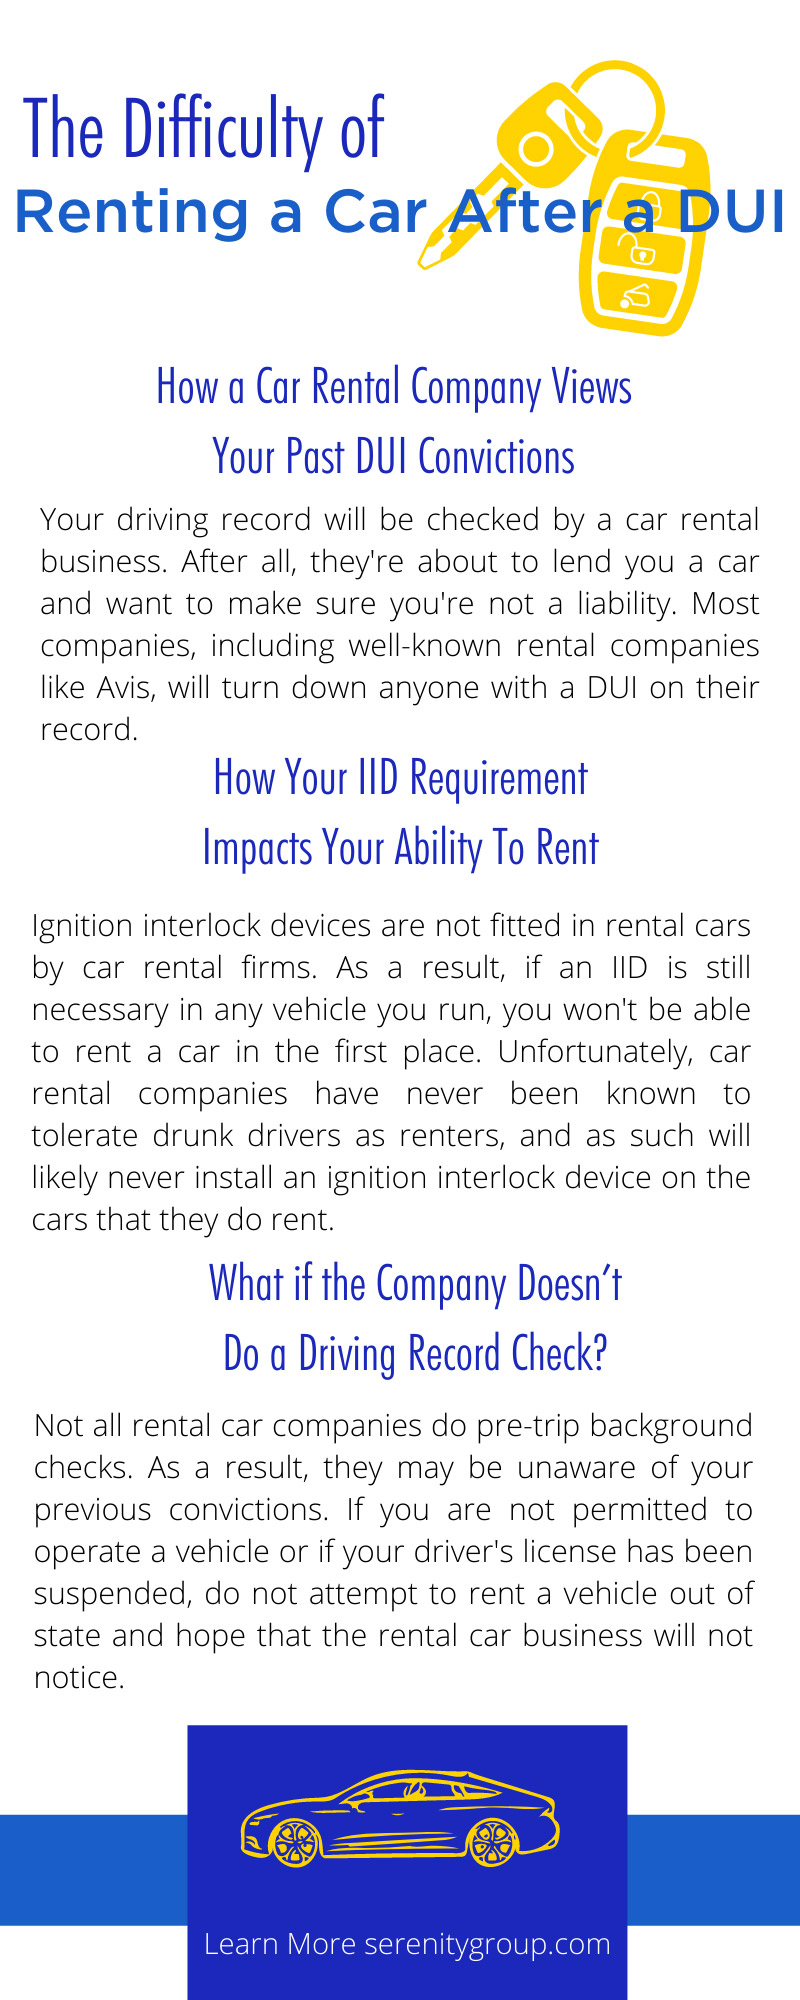 The Difficulty of Renting a Car After a DUI